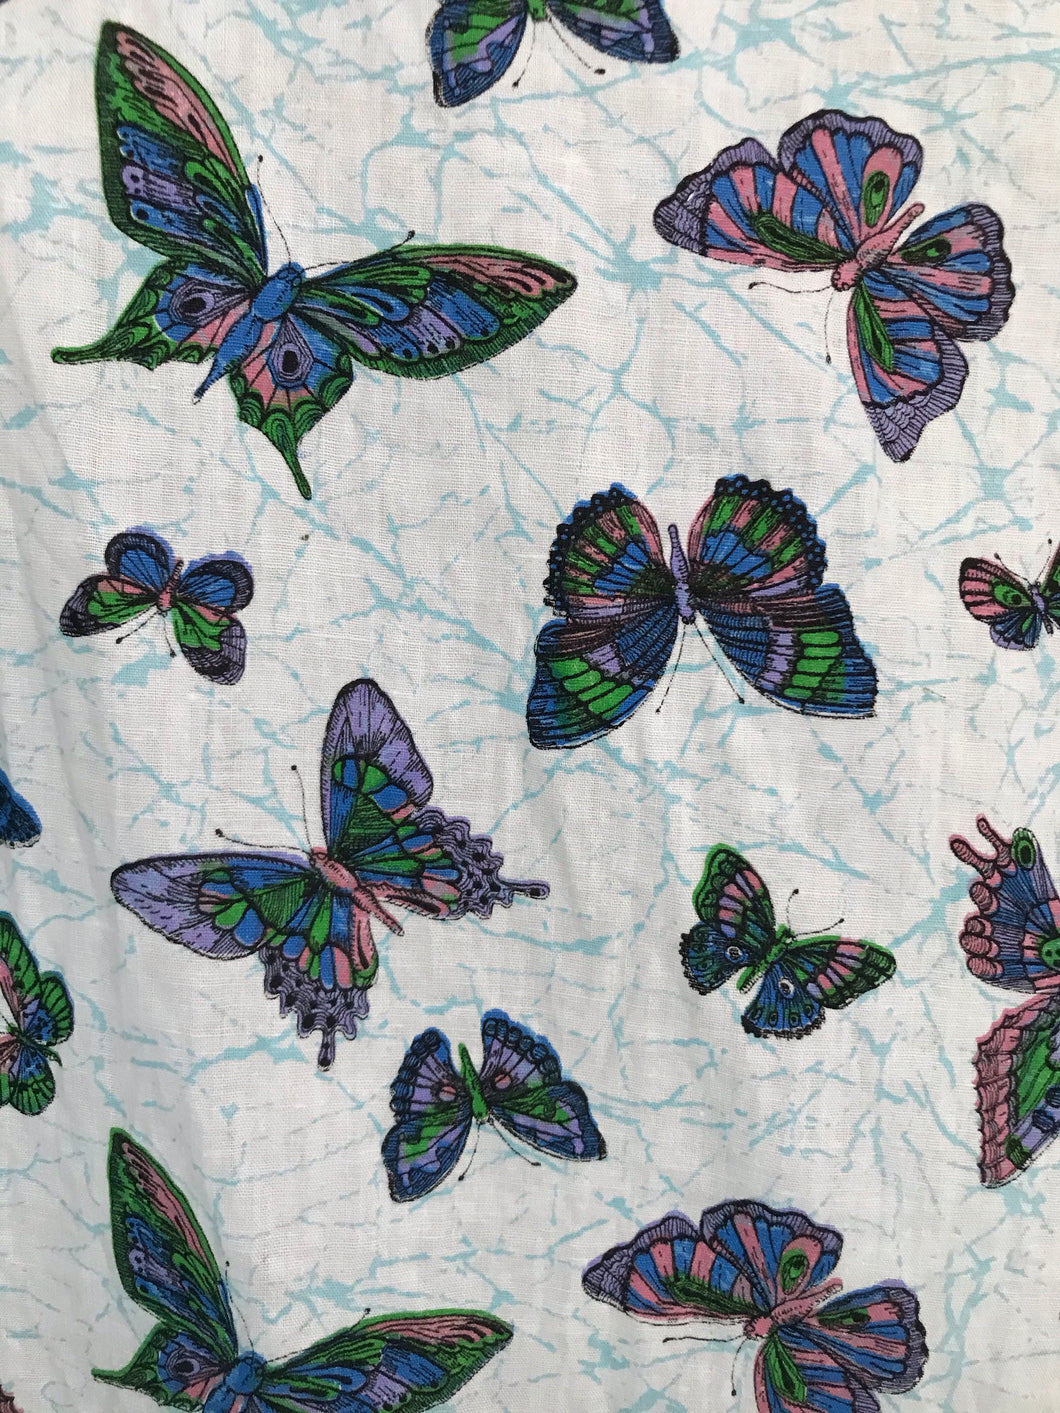 1950’s Rainbow Butterflies on white with blue veining fabric - Cotton